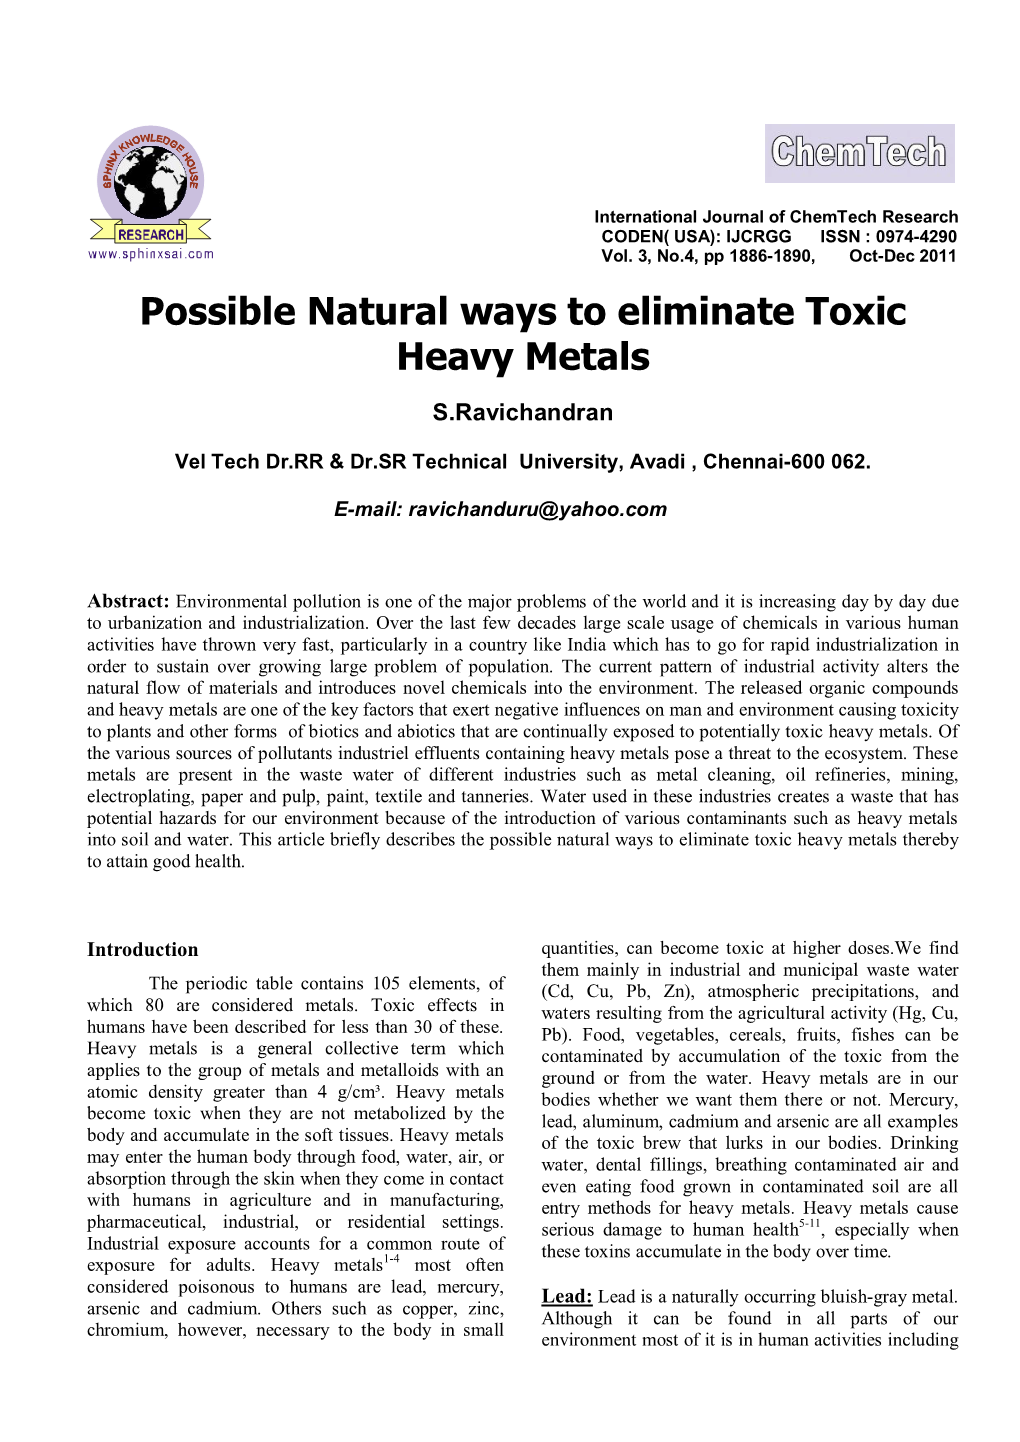 Possible Natural Ways to Eliminate Toxic Heavy Metals